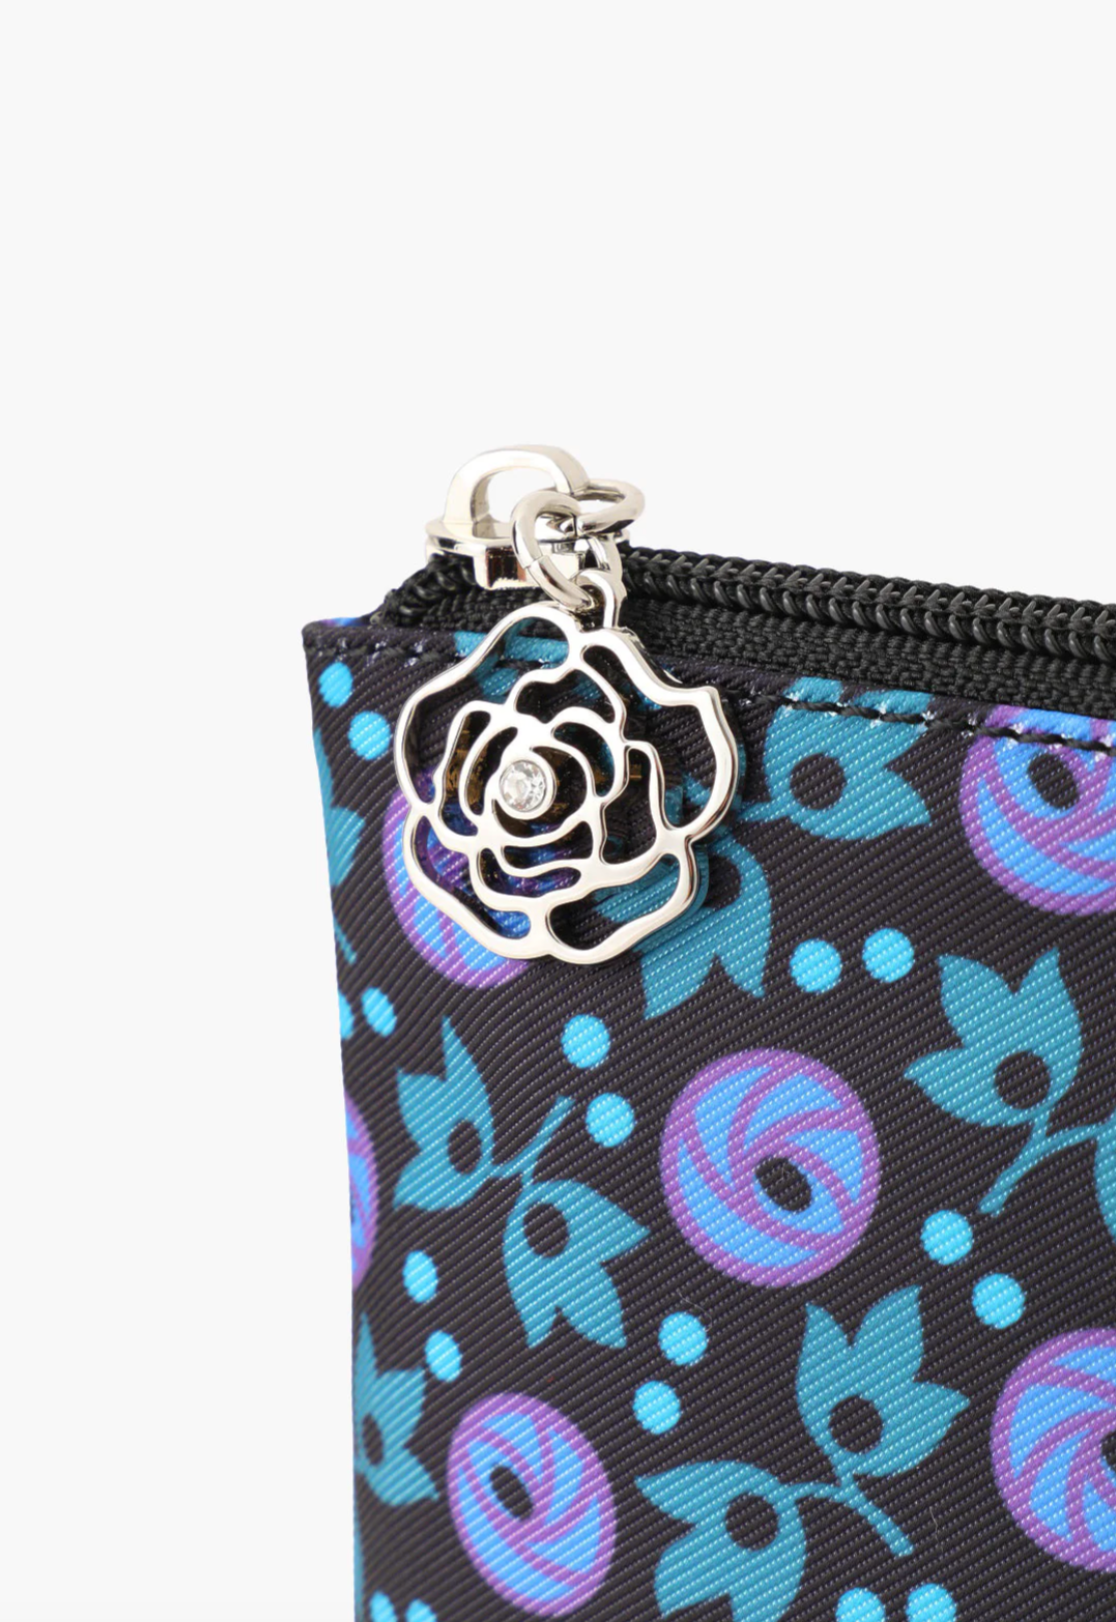 Detail of blue floral pouch and is finished with a silver rose charm zipper closure